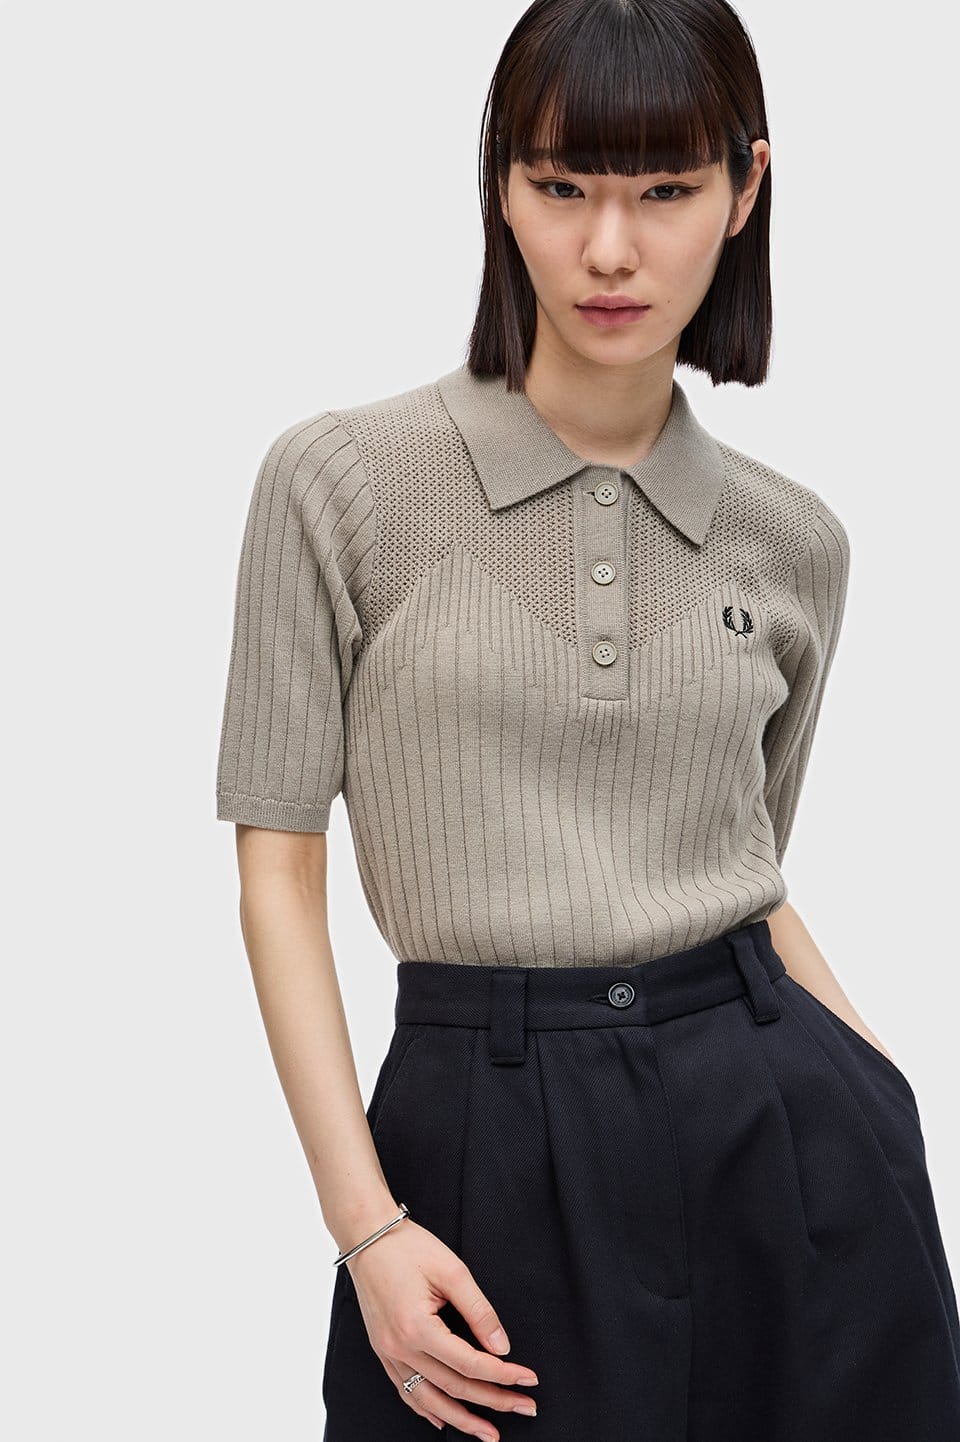 Women's Knitted Polo Shirt in Taupe